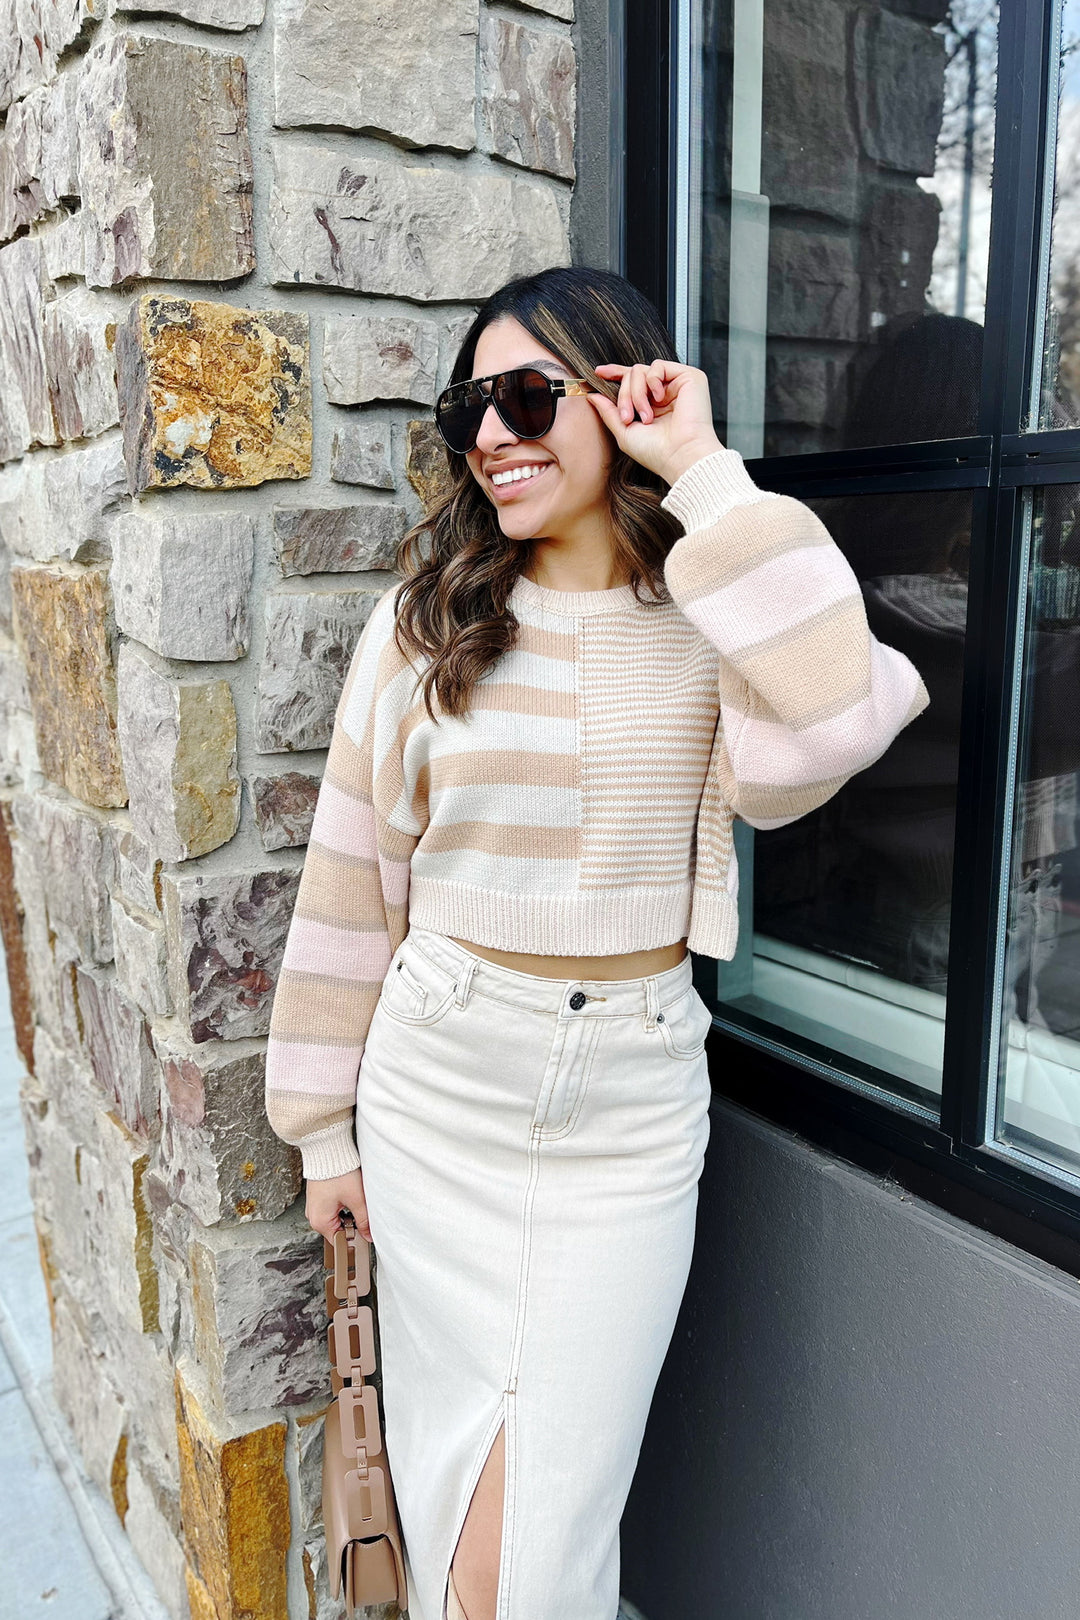 The Mesmerize Me Beige Striped Cropped Sweater